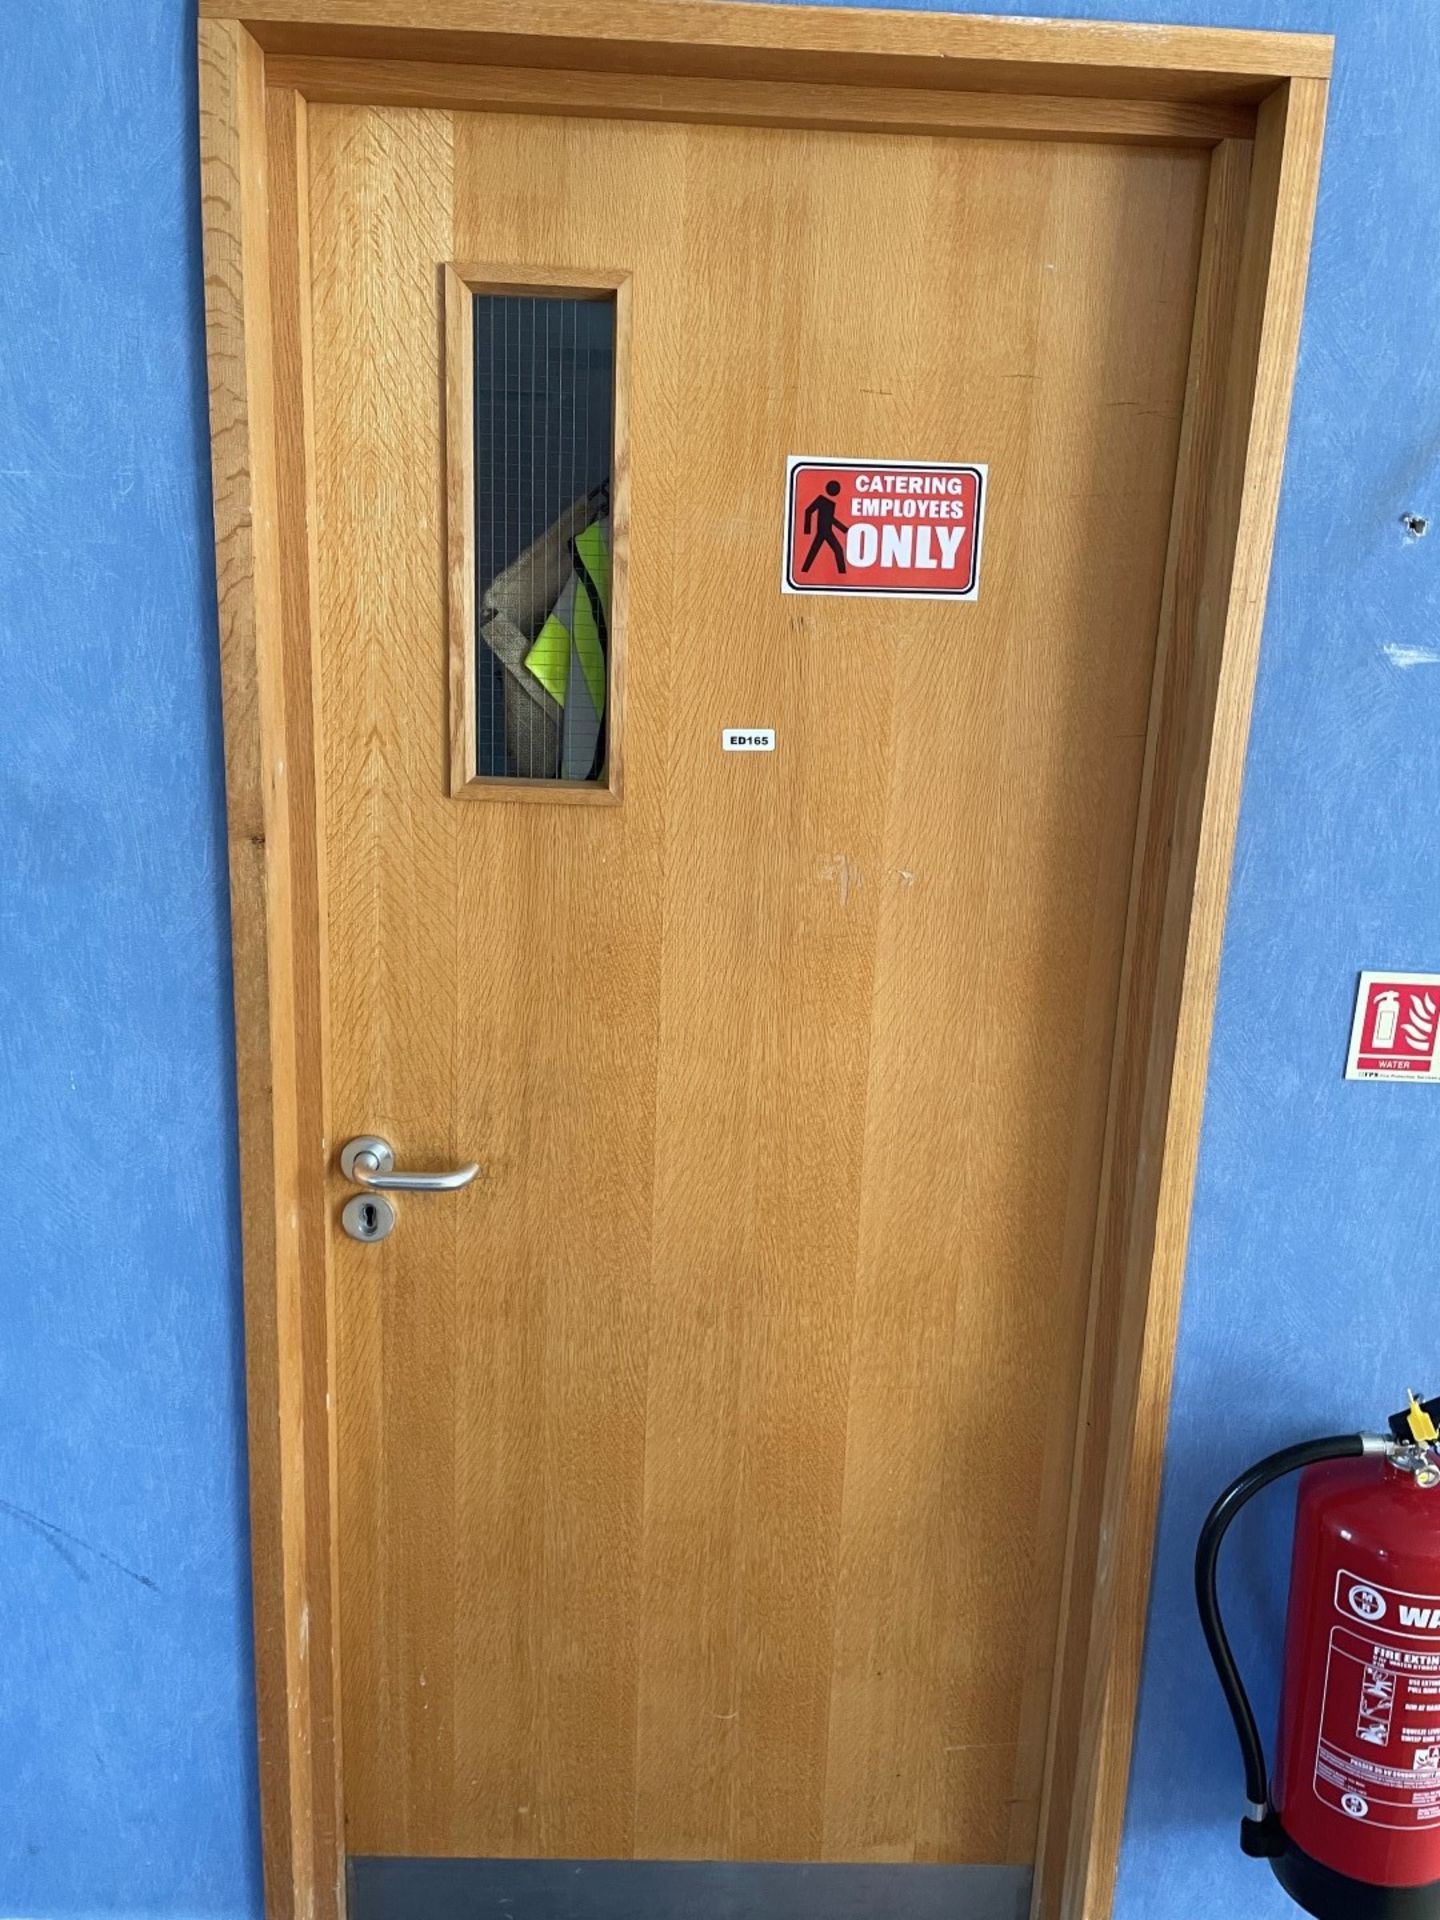 1 x Wooden Door - H202 x W91cm - Ref: ED165 - To Be Removed From An Executive Office Environment - C